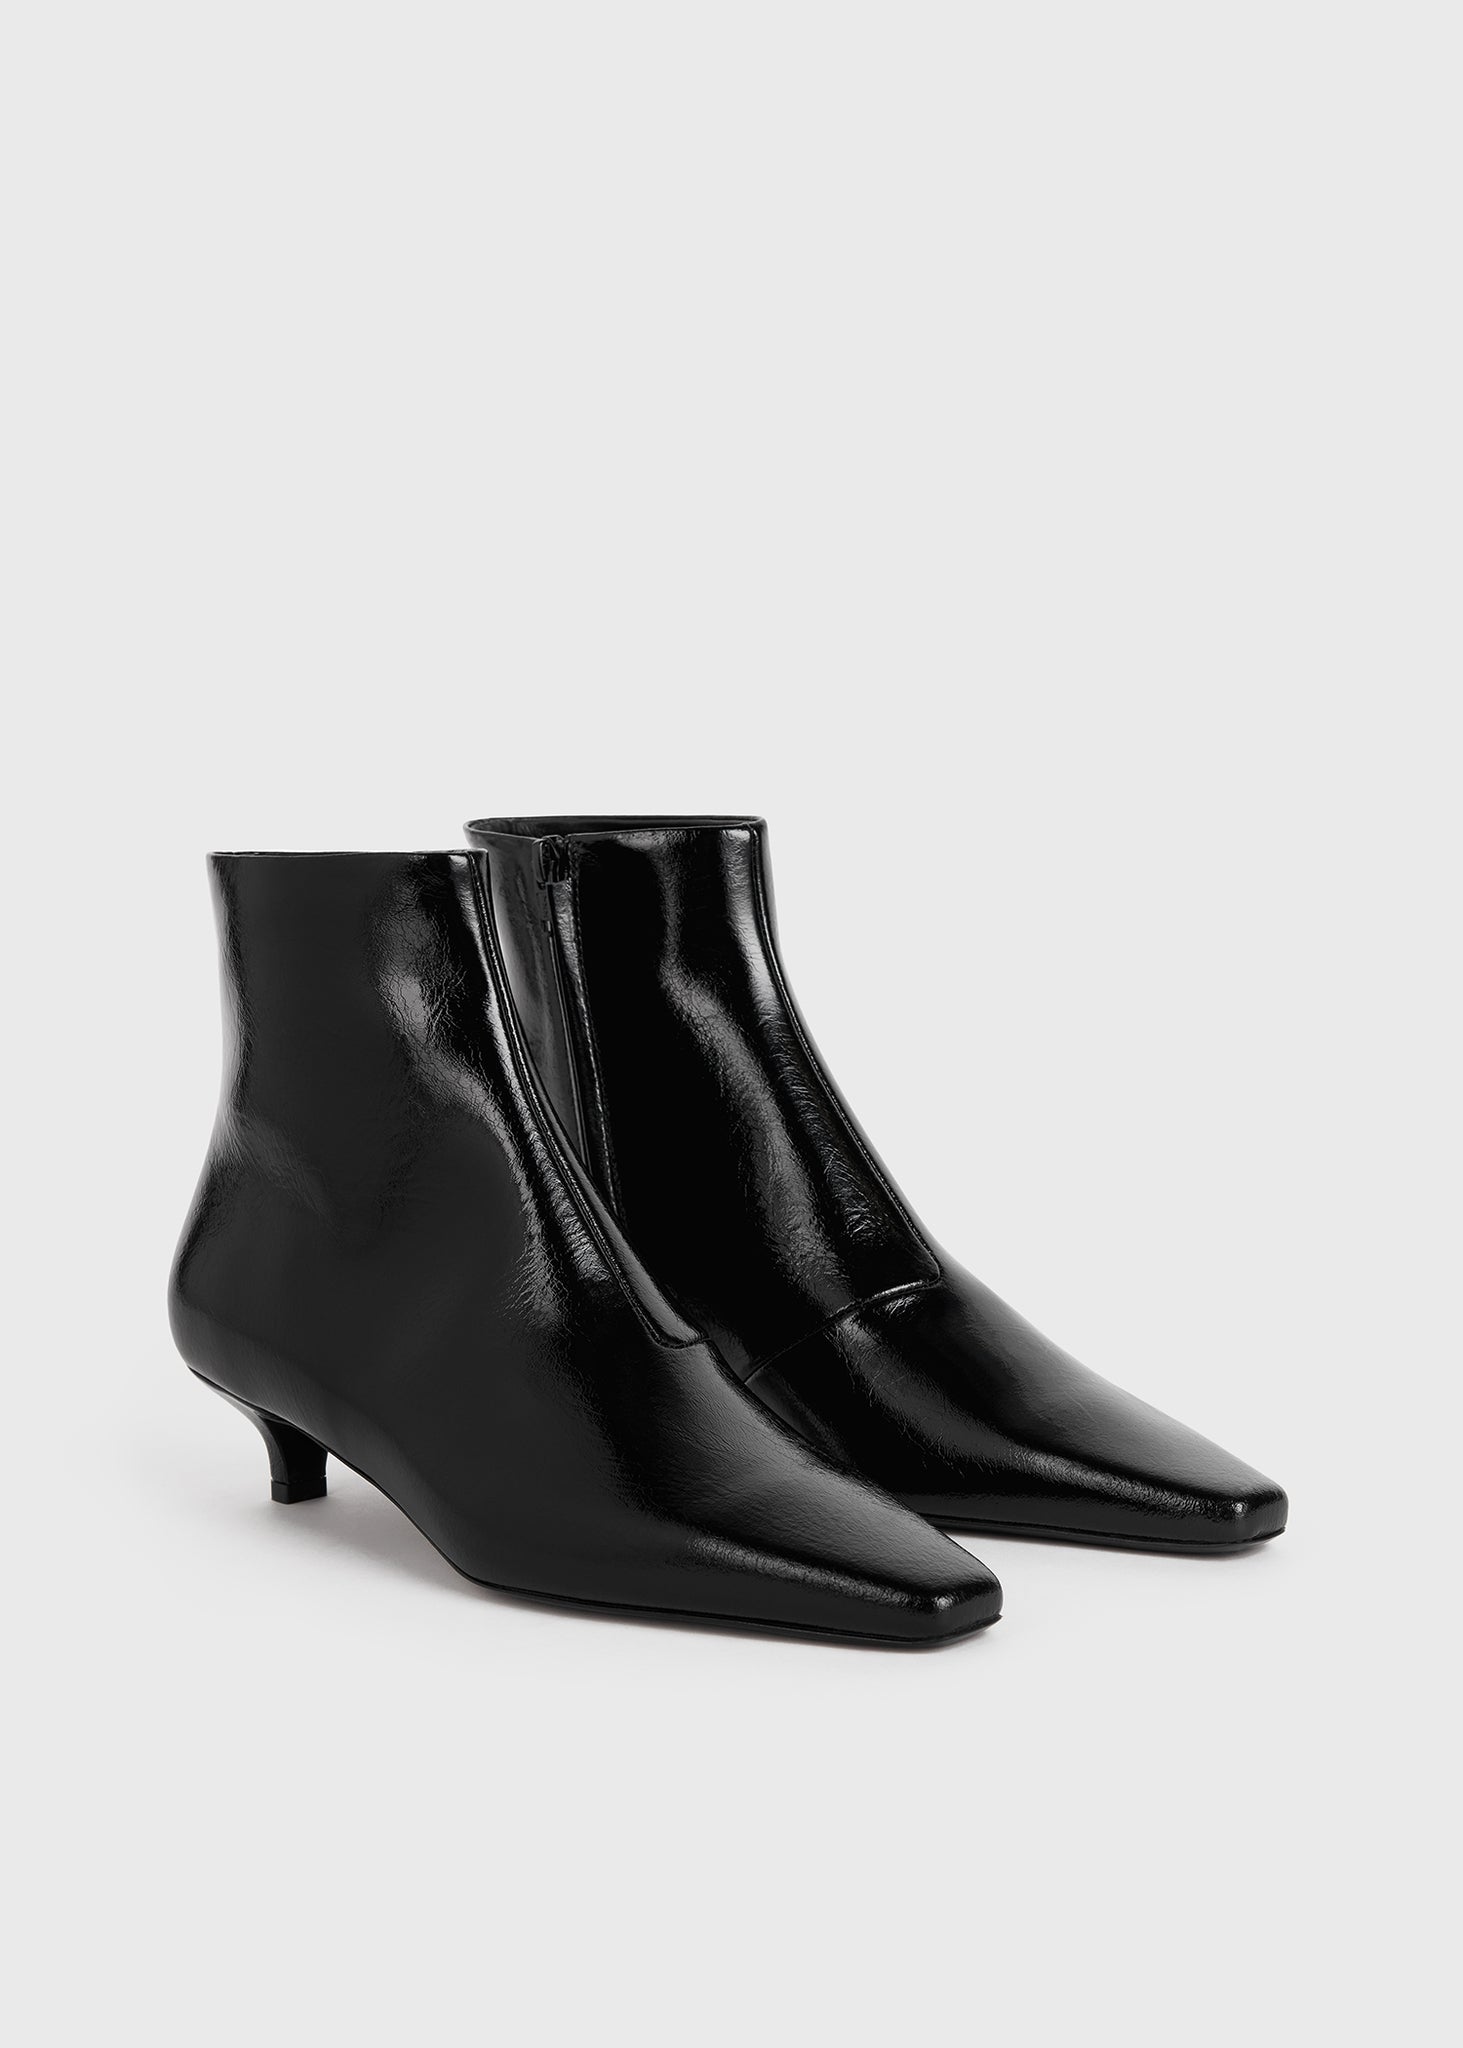 The Slim Ankle Boot black patent